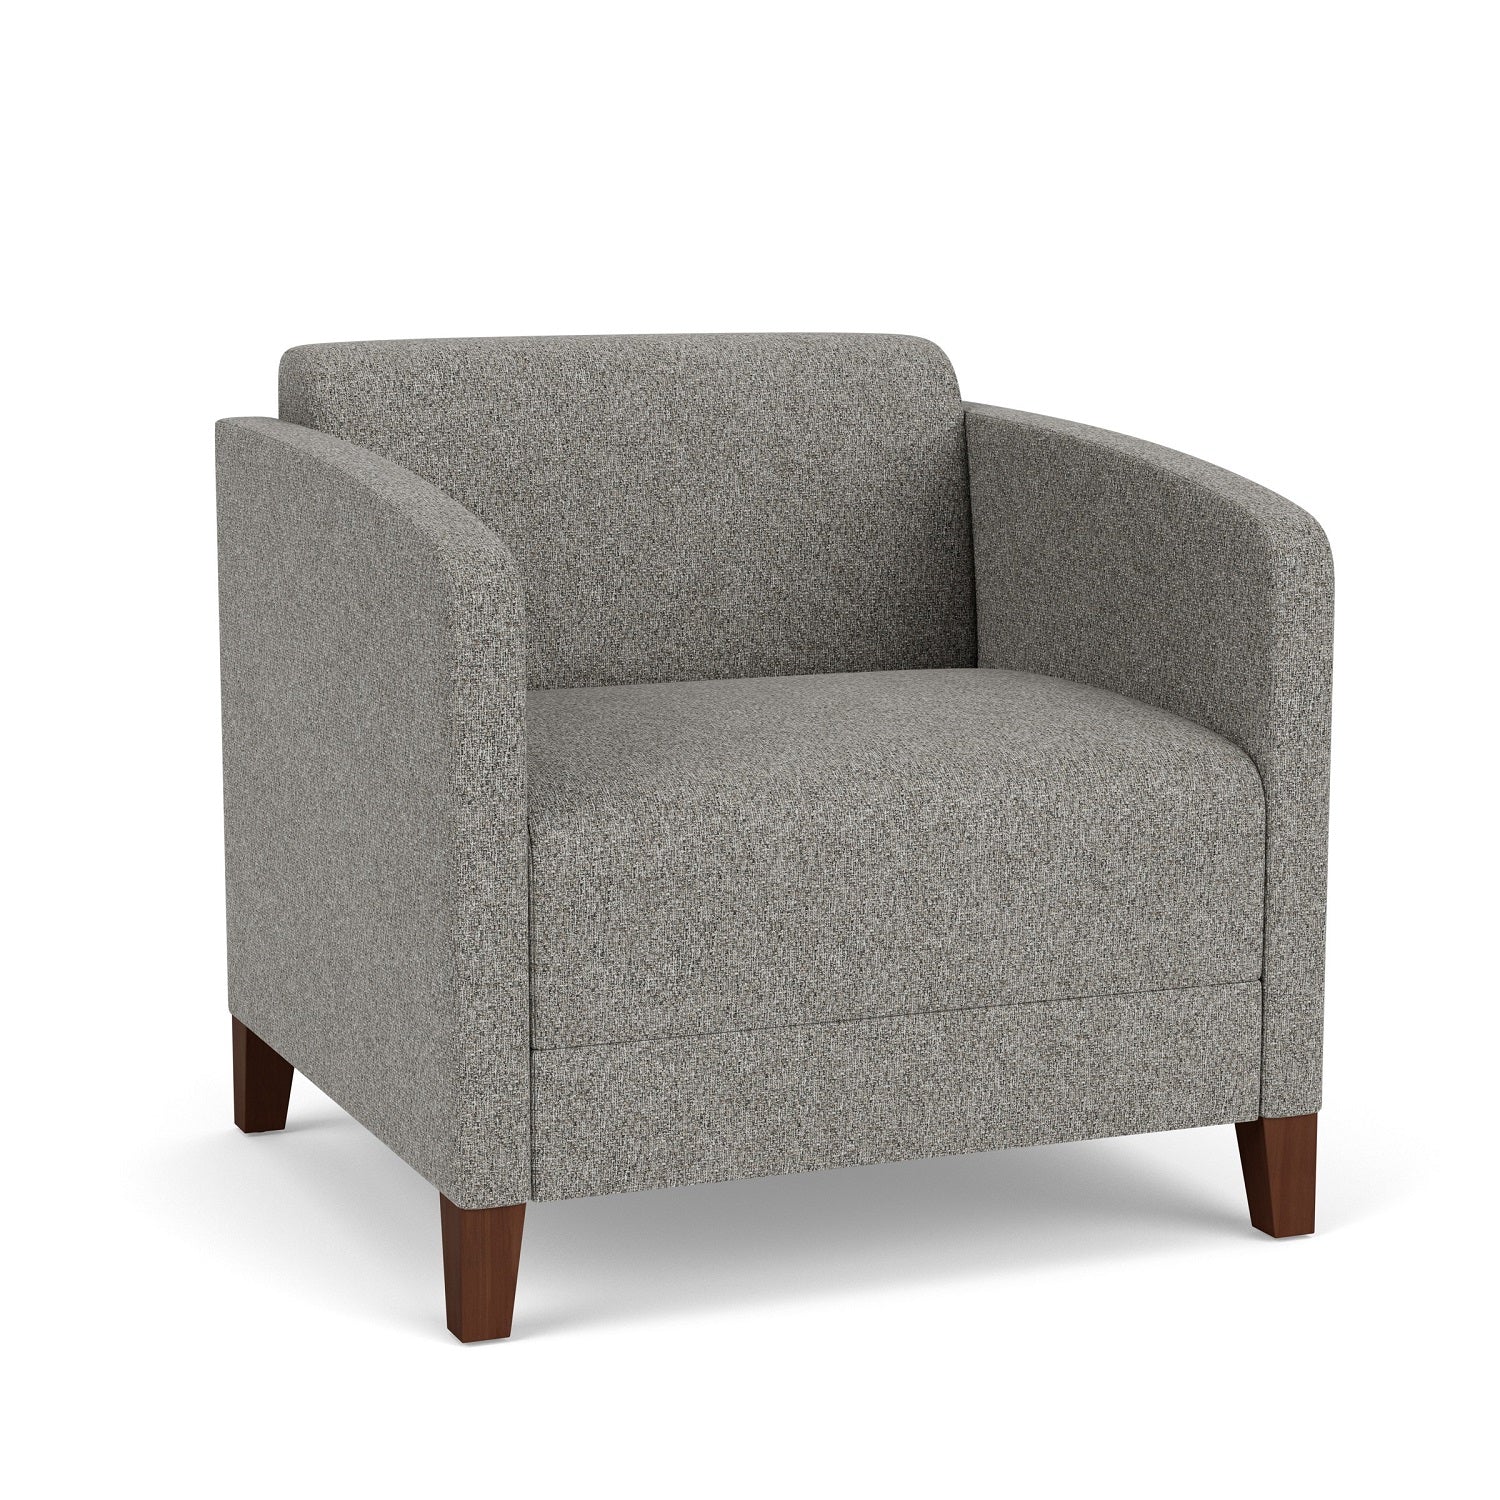 Fremont Collection Reception Seating, Guest Chair, 500 lb. Capacity, Standard Fabric Upholstery, FREE SHIPPING